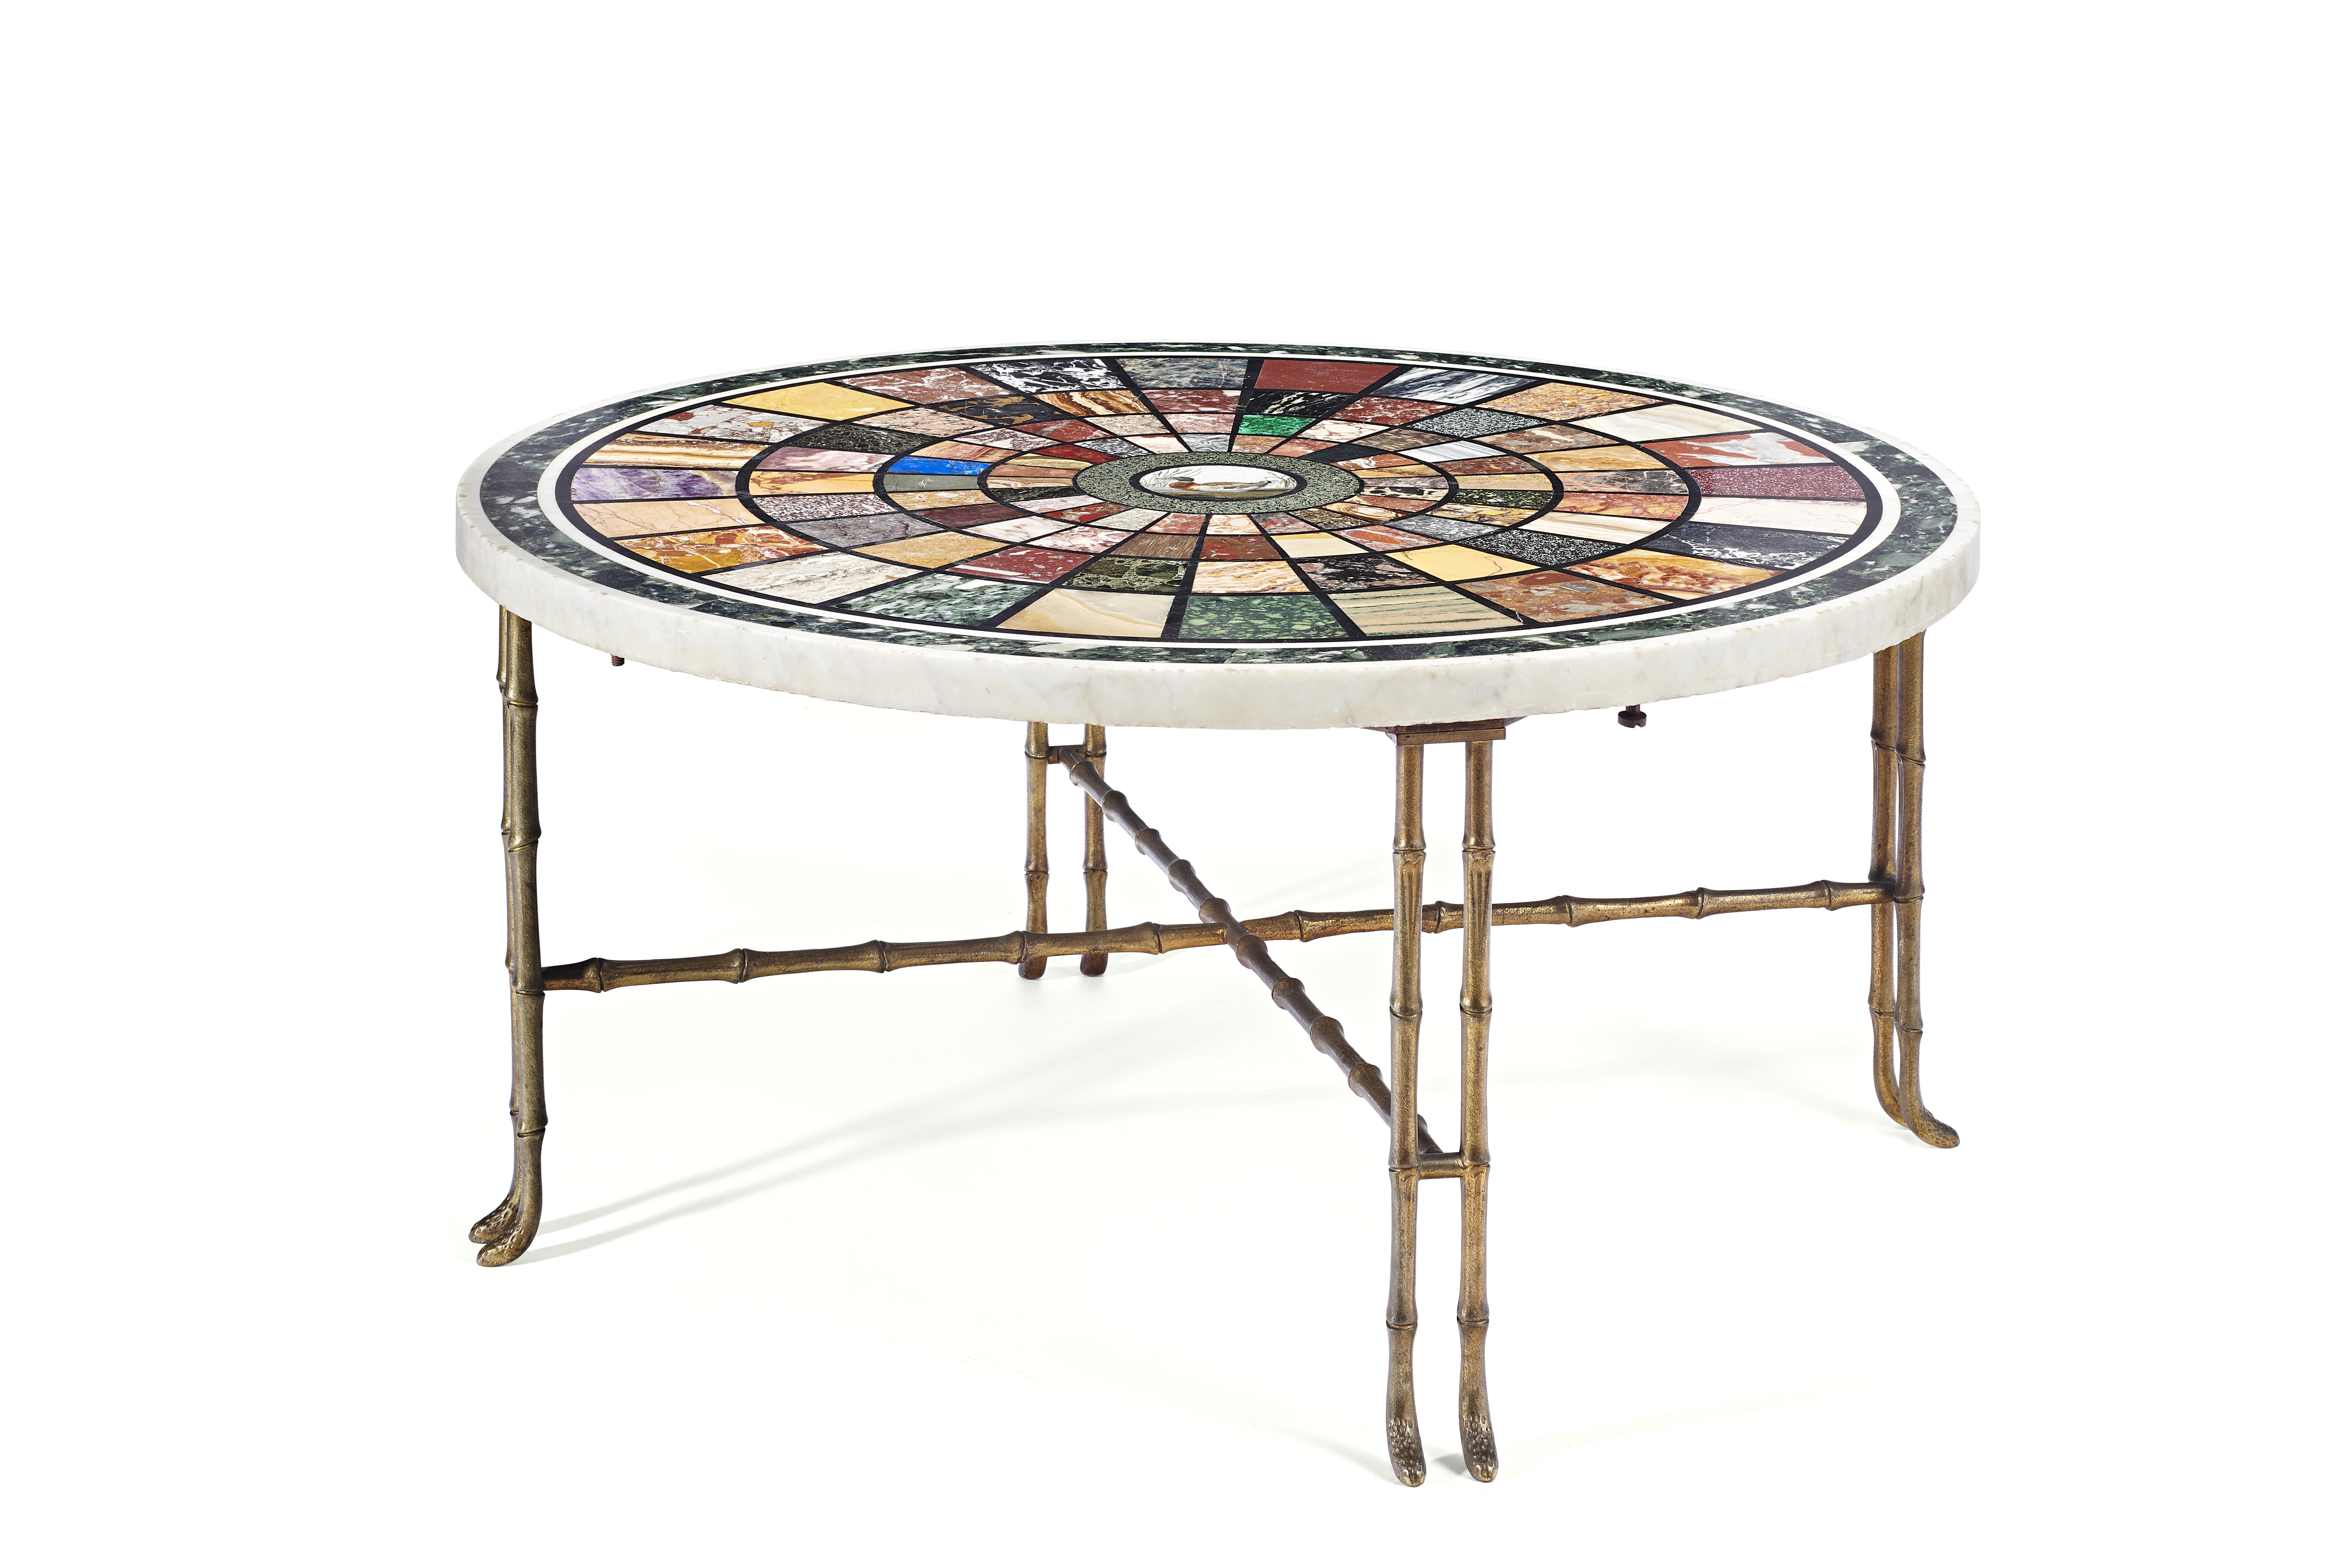 A mid-19th century Italian specimen marble and micromosaic Grand Tour table top, inlaid with - Image 3 of 3